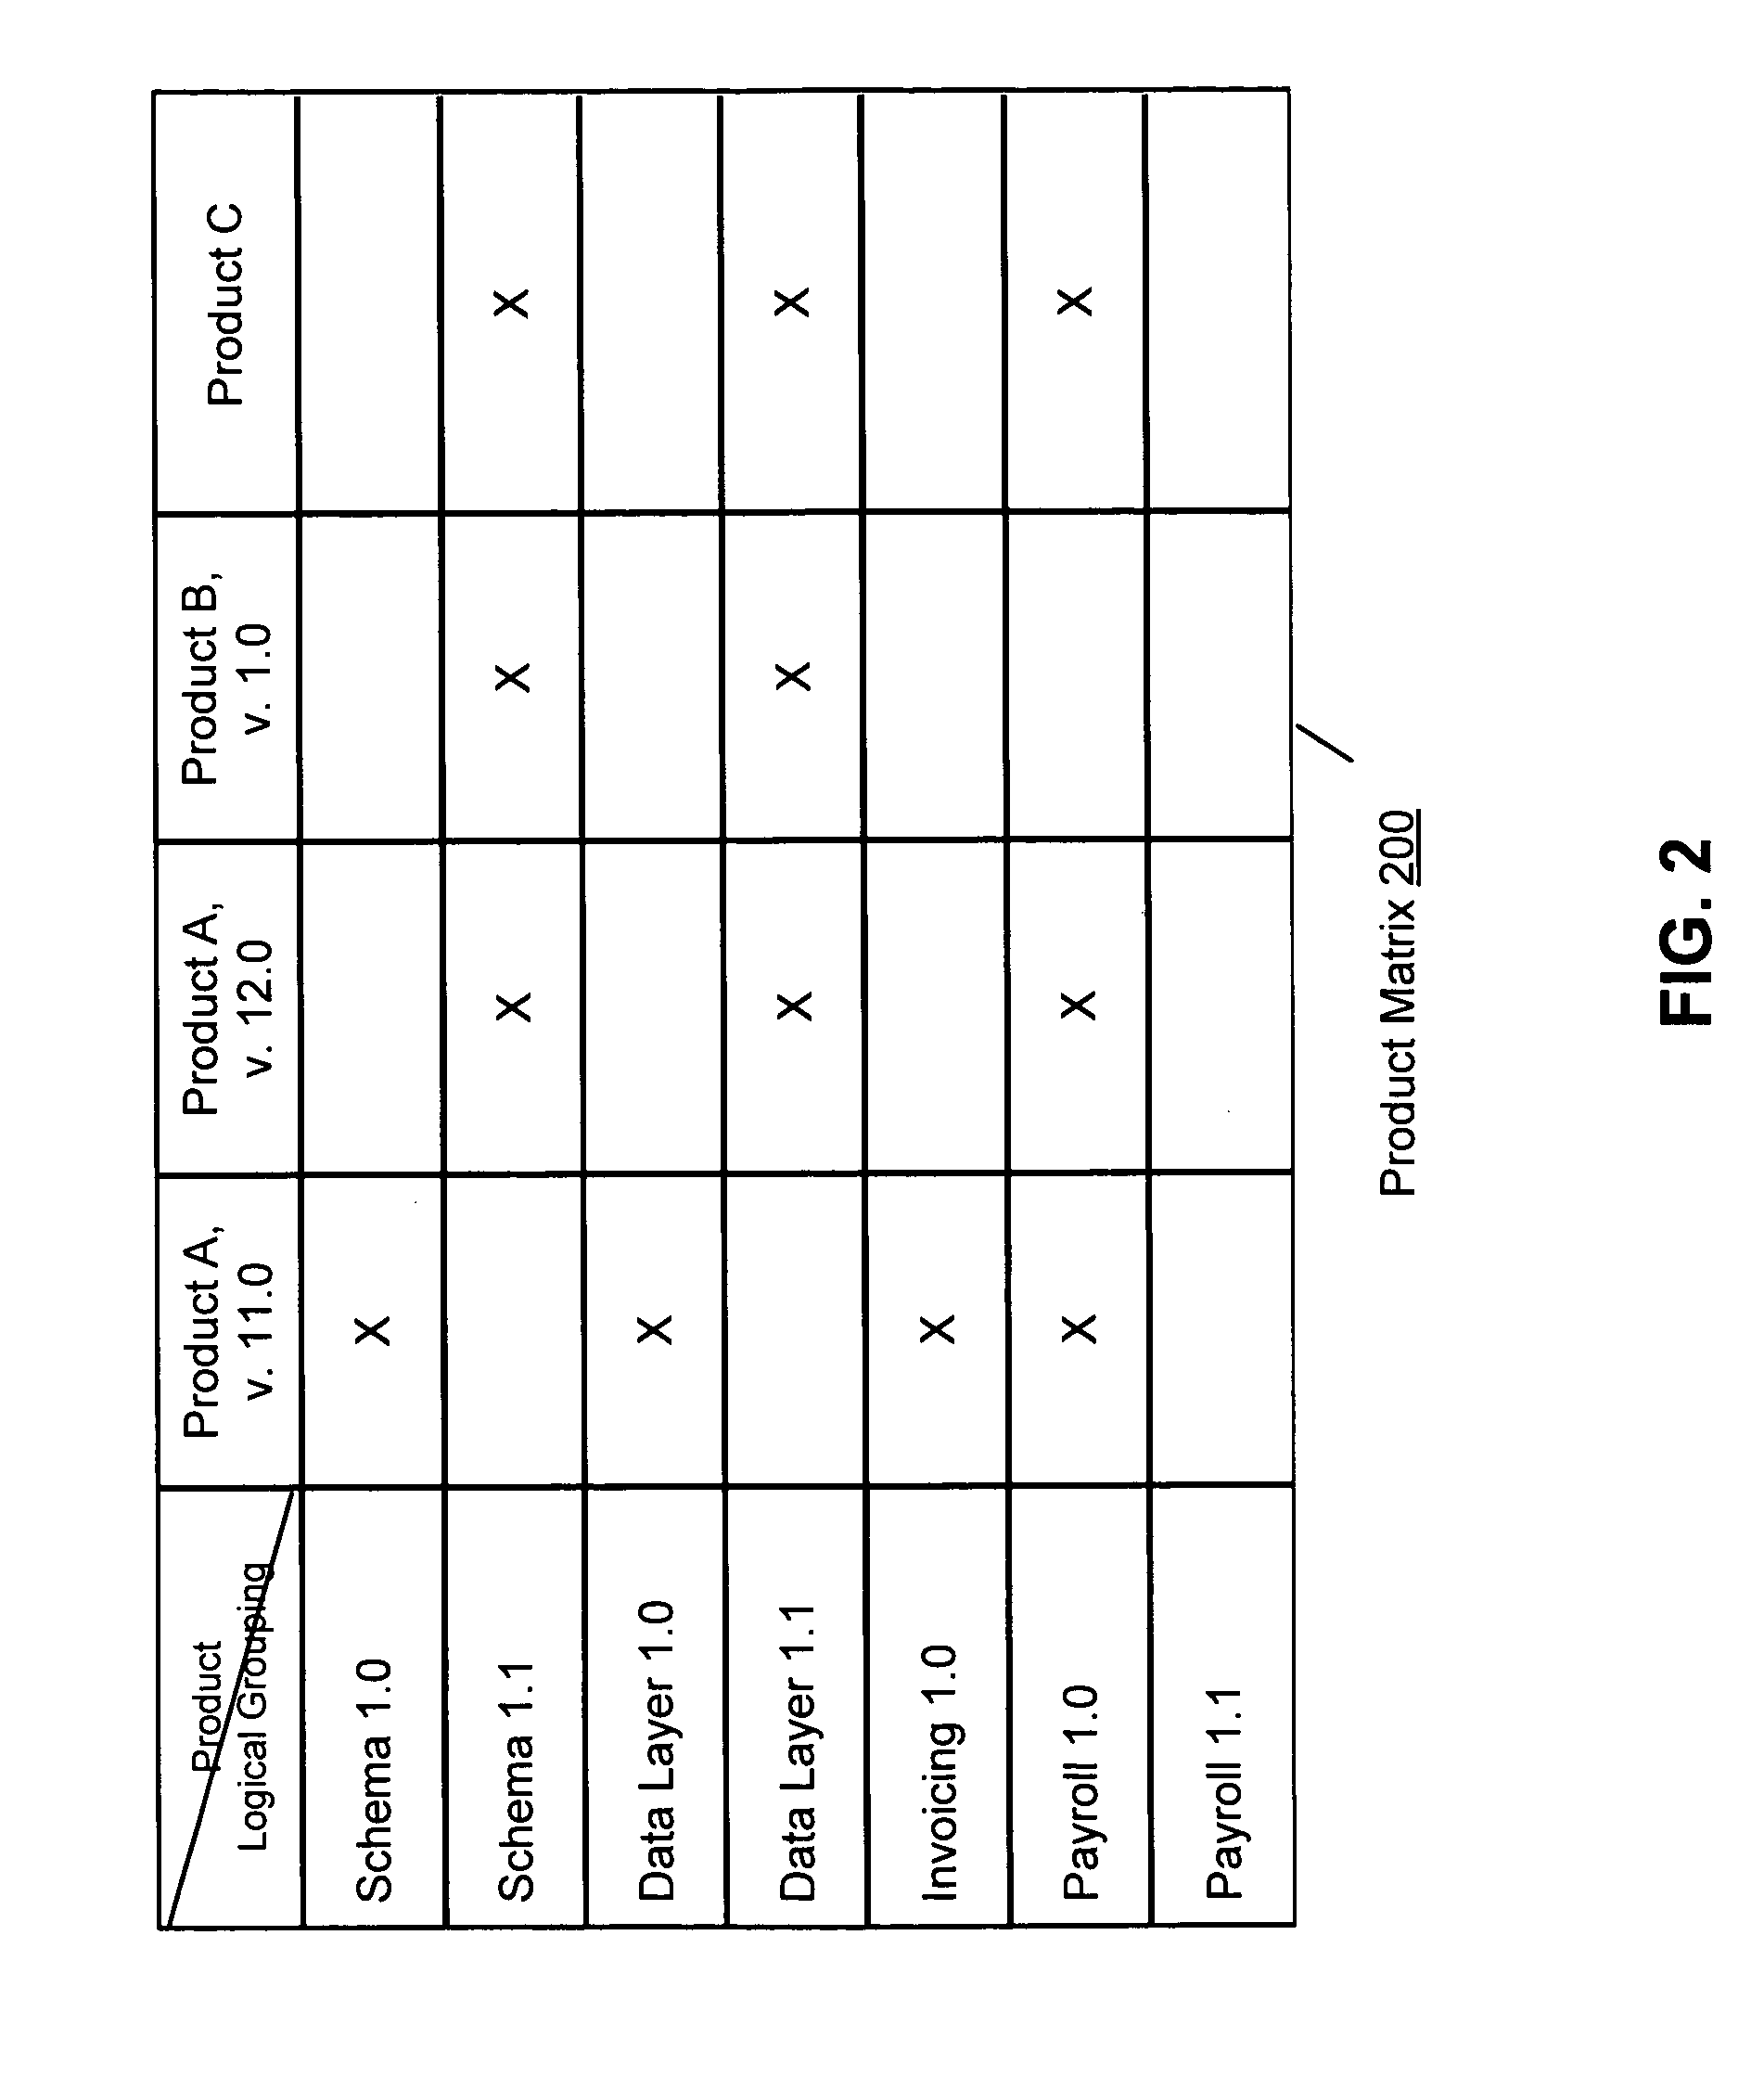 Management of compatibility of software products installed on a user's computing device